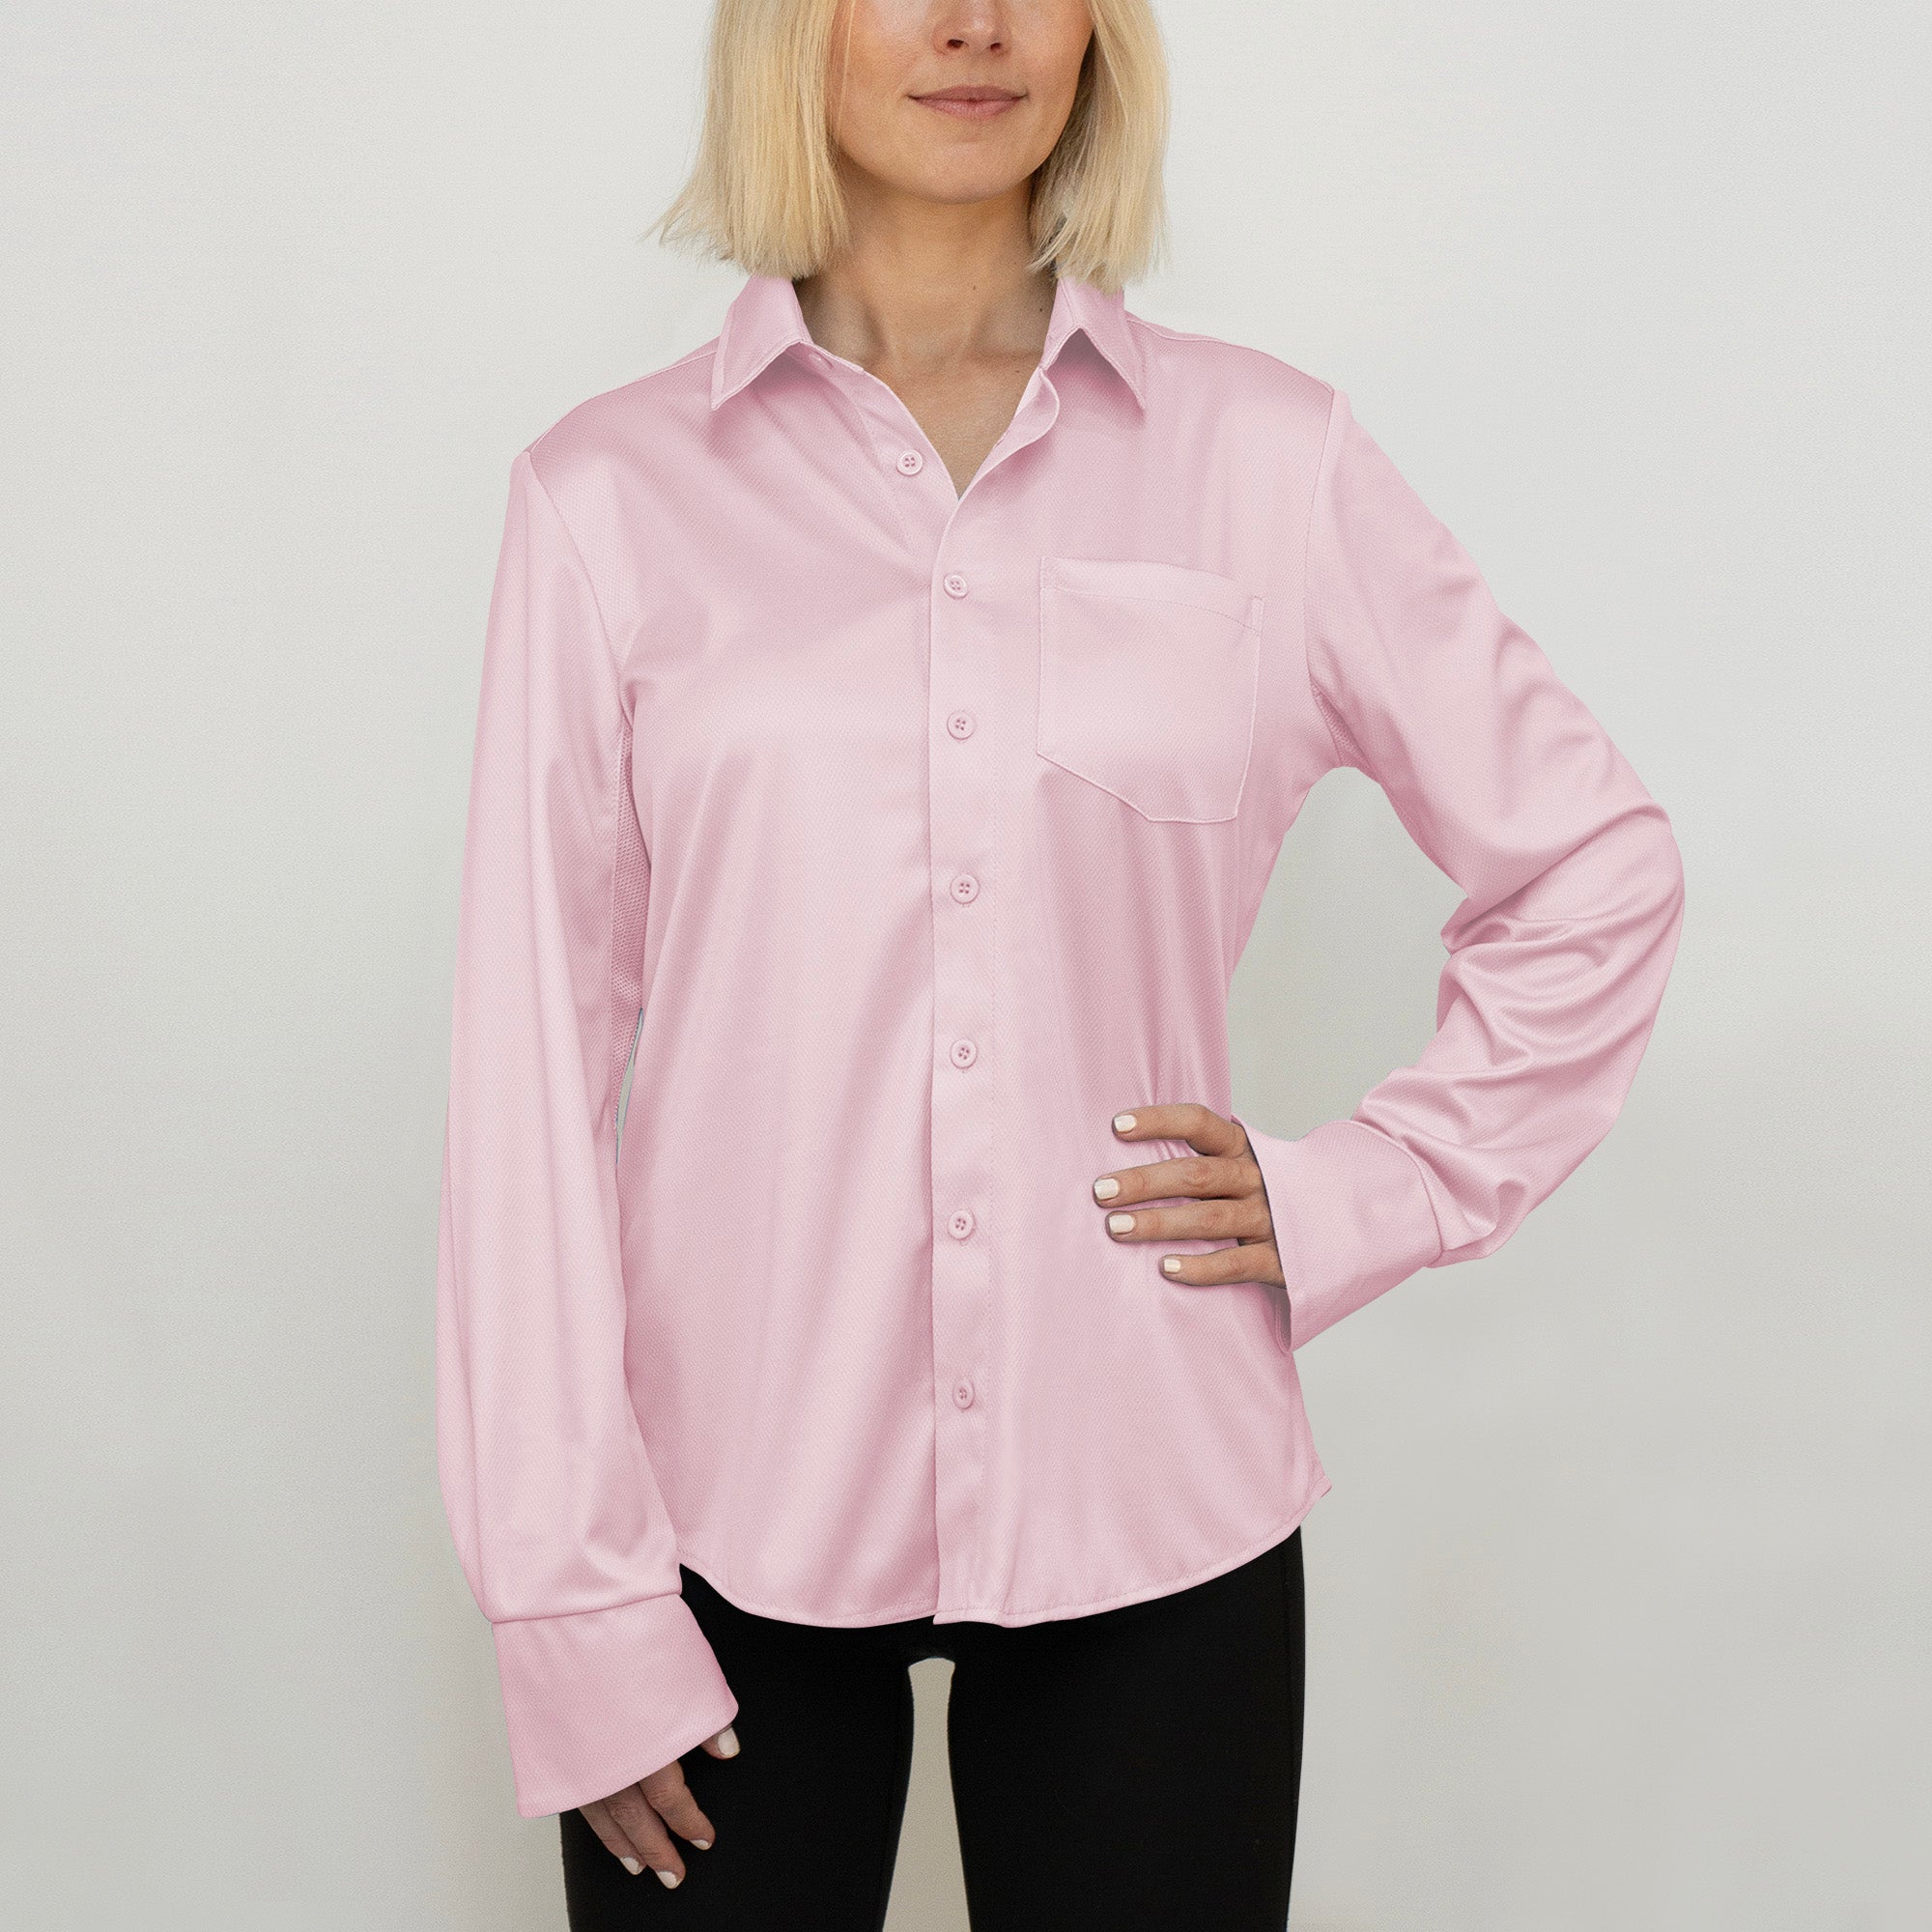 Ladies Outdoor Shirt Pretty in Pink UPF50+ sun safe clothing, uv long sleeve shirt, fashionable protective uv clothing, sun protective clothing for women, sun shirts, sun protection shirts, sun safe clothing, women protection shirts uv